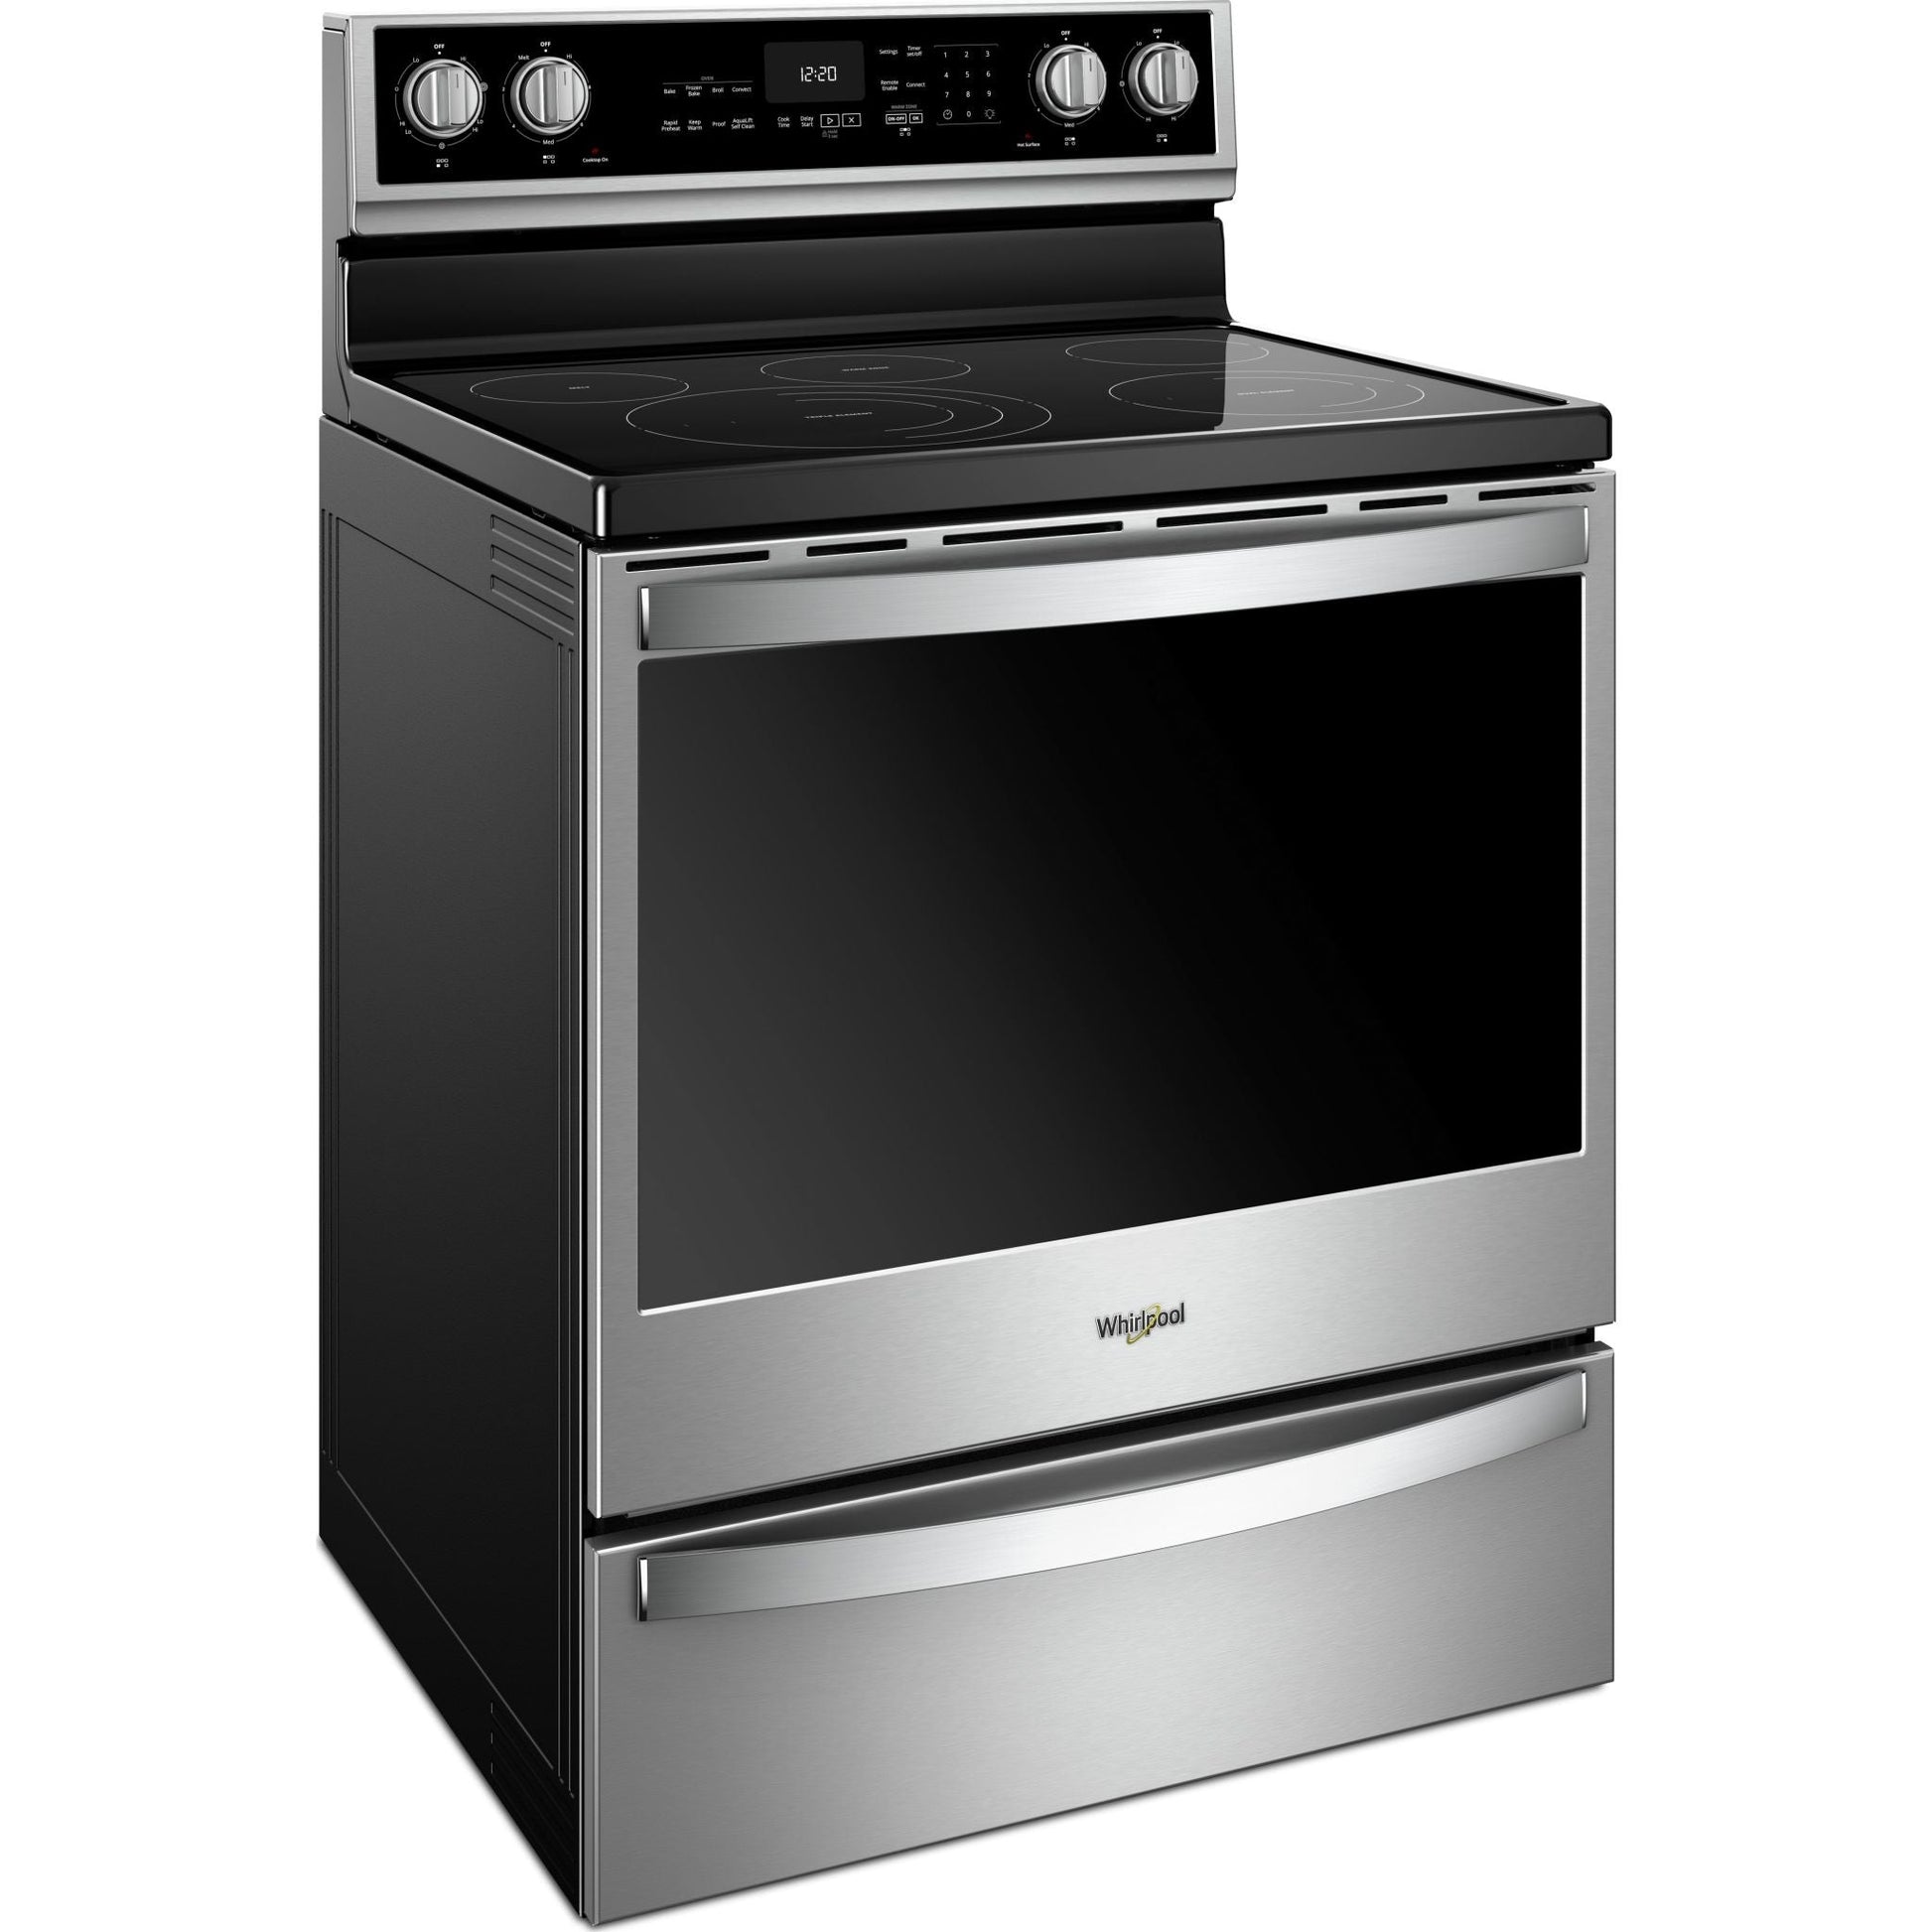 Whirlpool True Convection Range (YWFE975H0HZ) - Stainless Steel